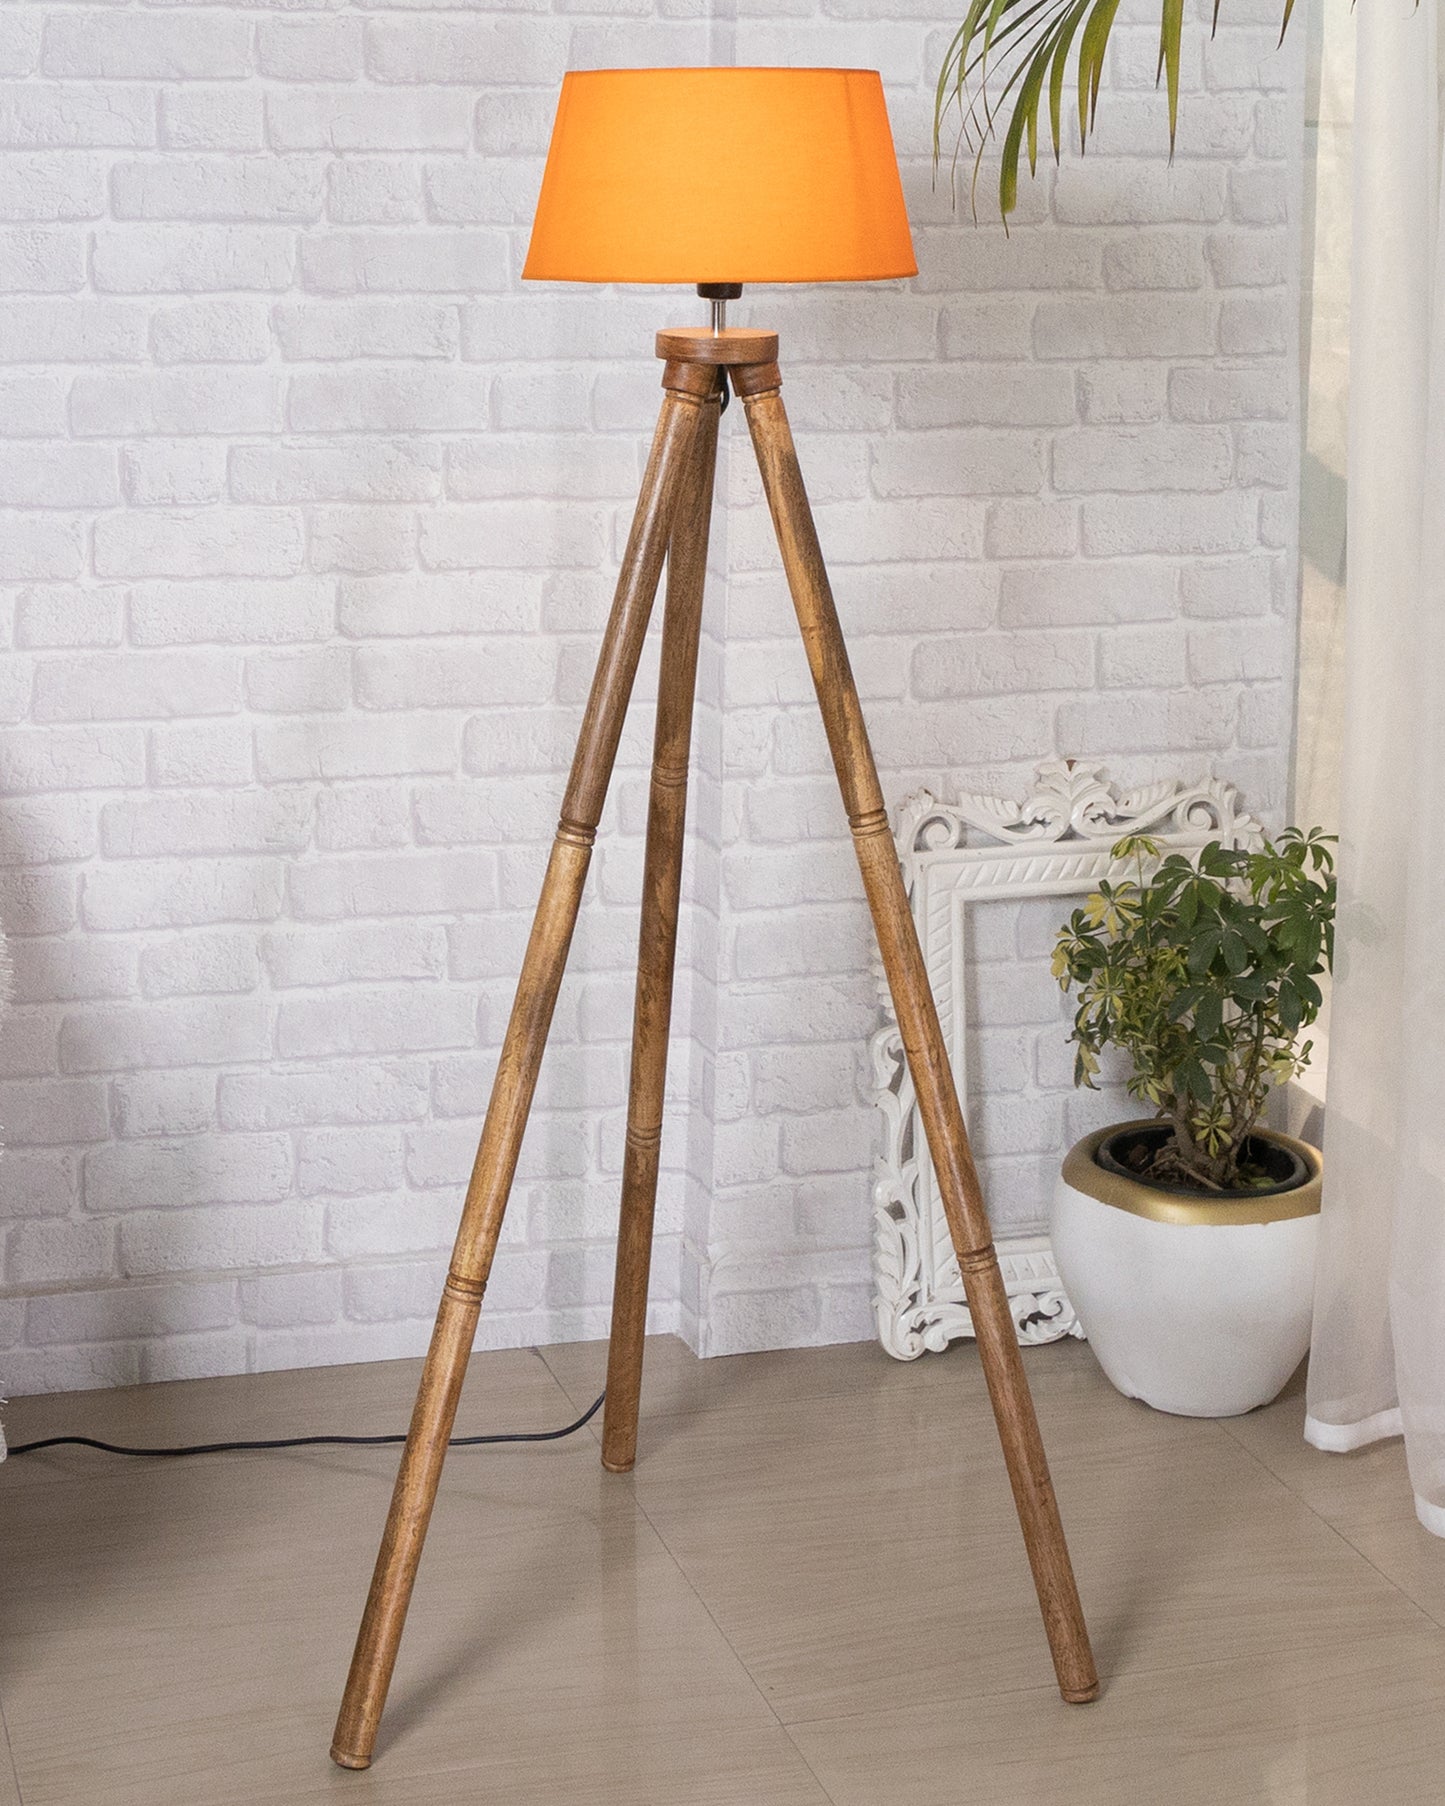 Wood Tripod Floor Lamp, Mid Century Standing Lamp, E27 Lamp Base, With shade Modern Design Floor Reading Lamp for Living Room Bedroom, Study Room and Office